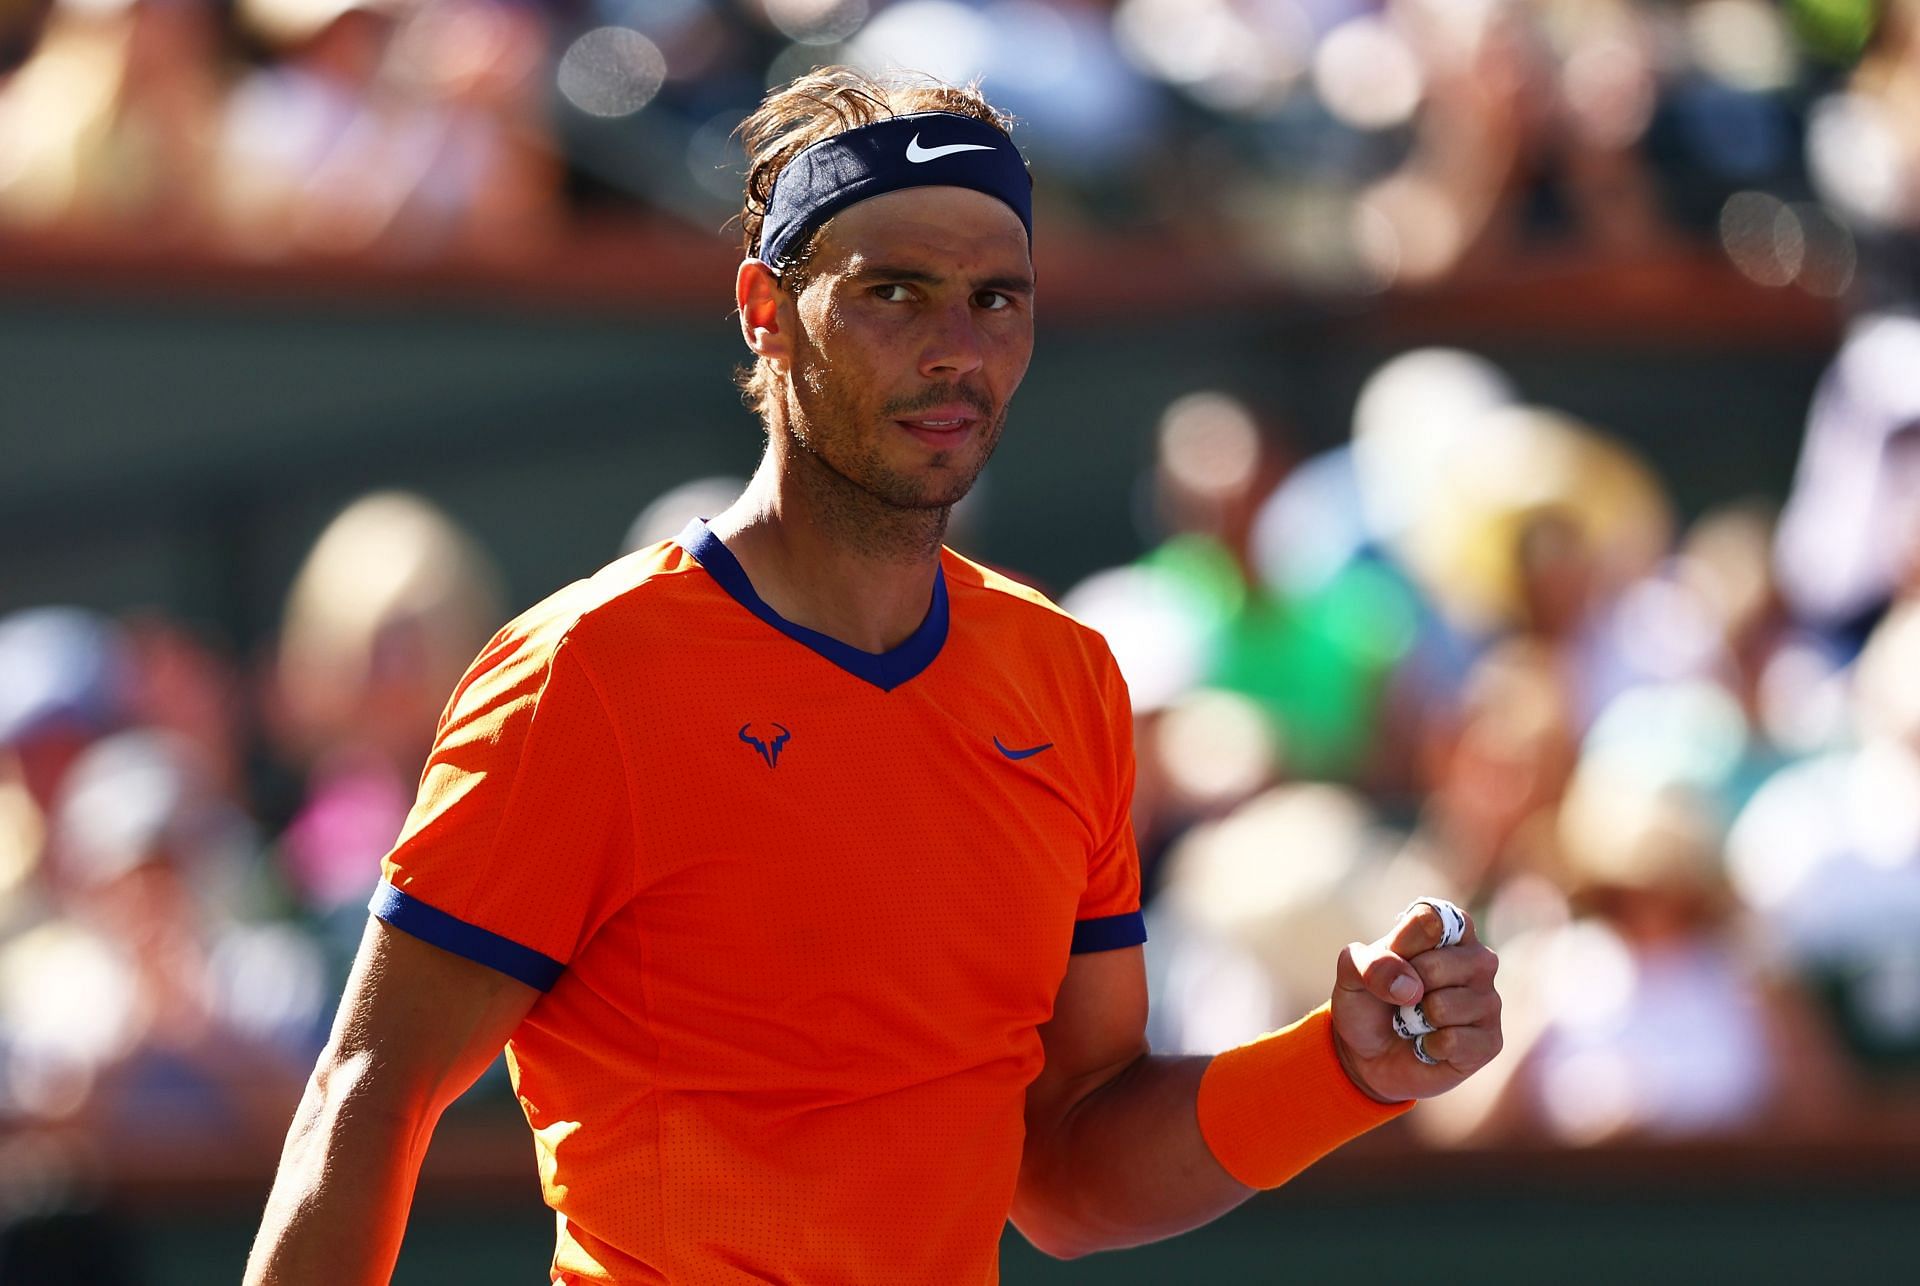 Rafael Nadal takes on Carlos Alcaraz in the semifinals of the 2022 Indian Wells Masters